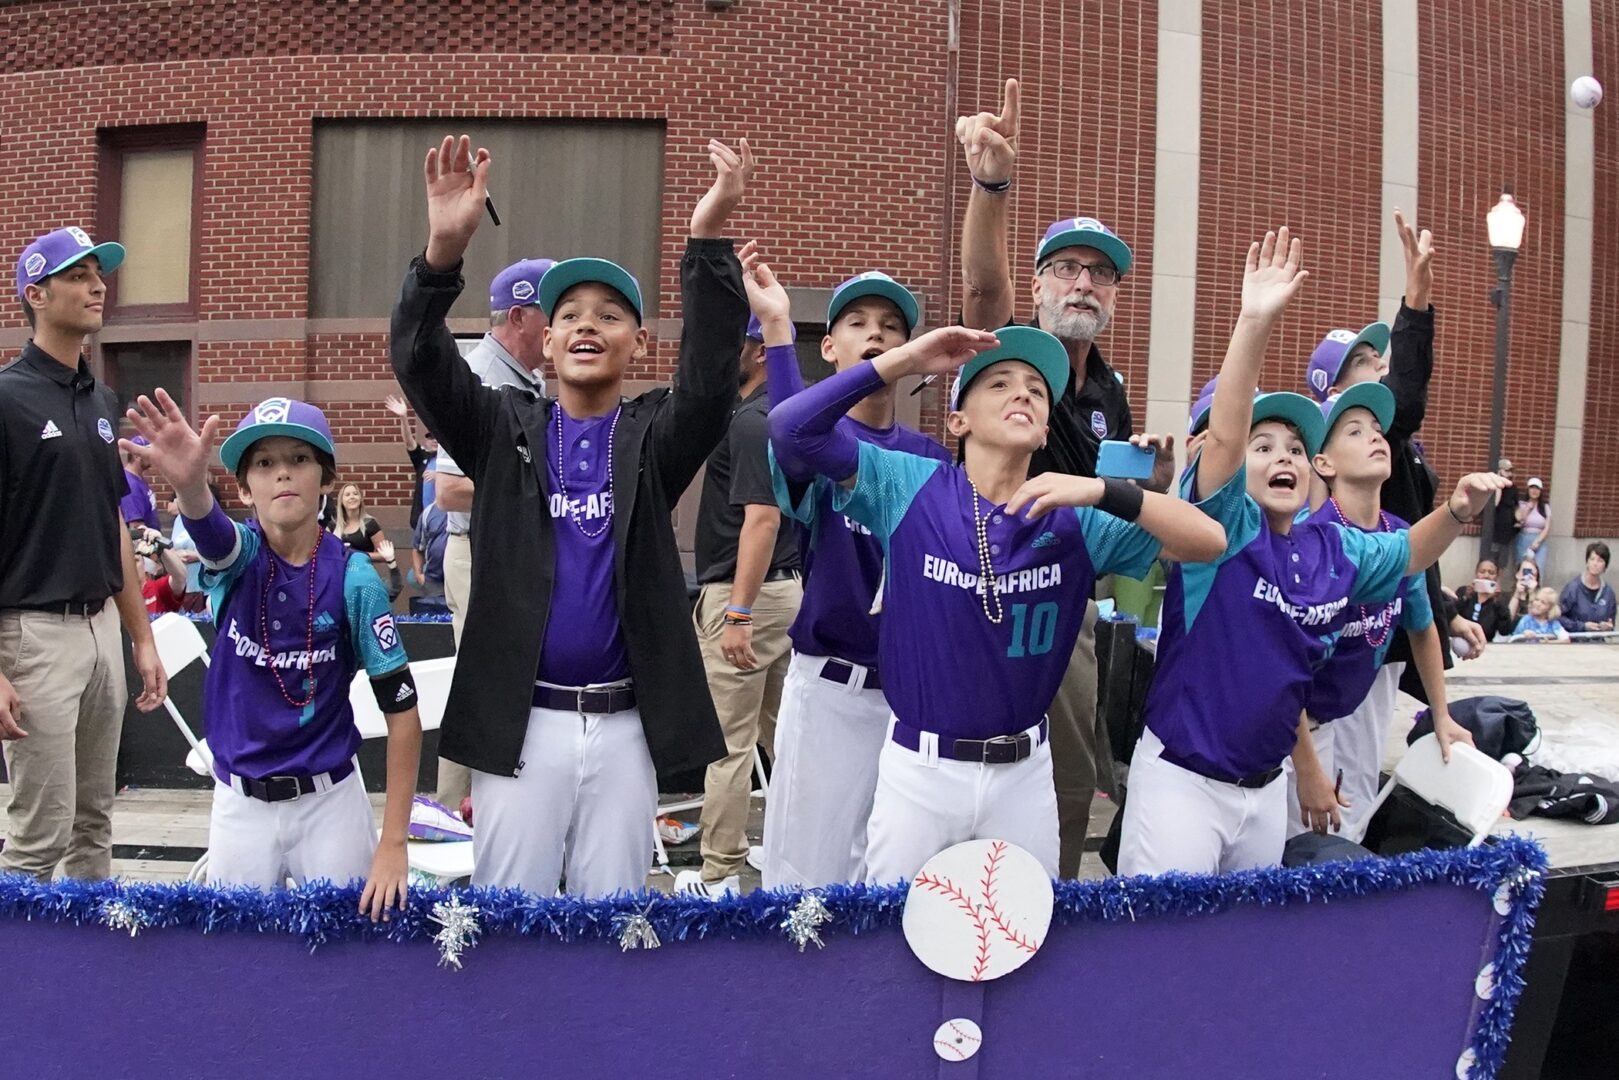 Little League World Series is back with 4 more teams in